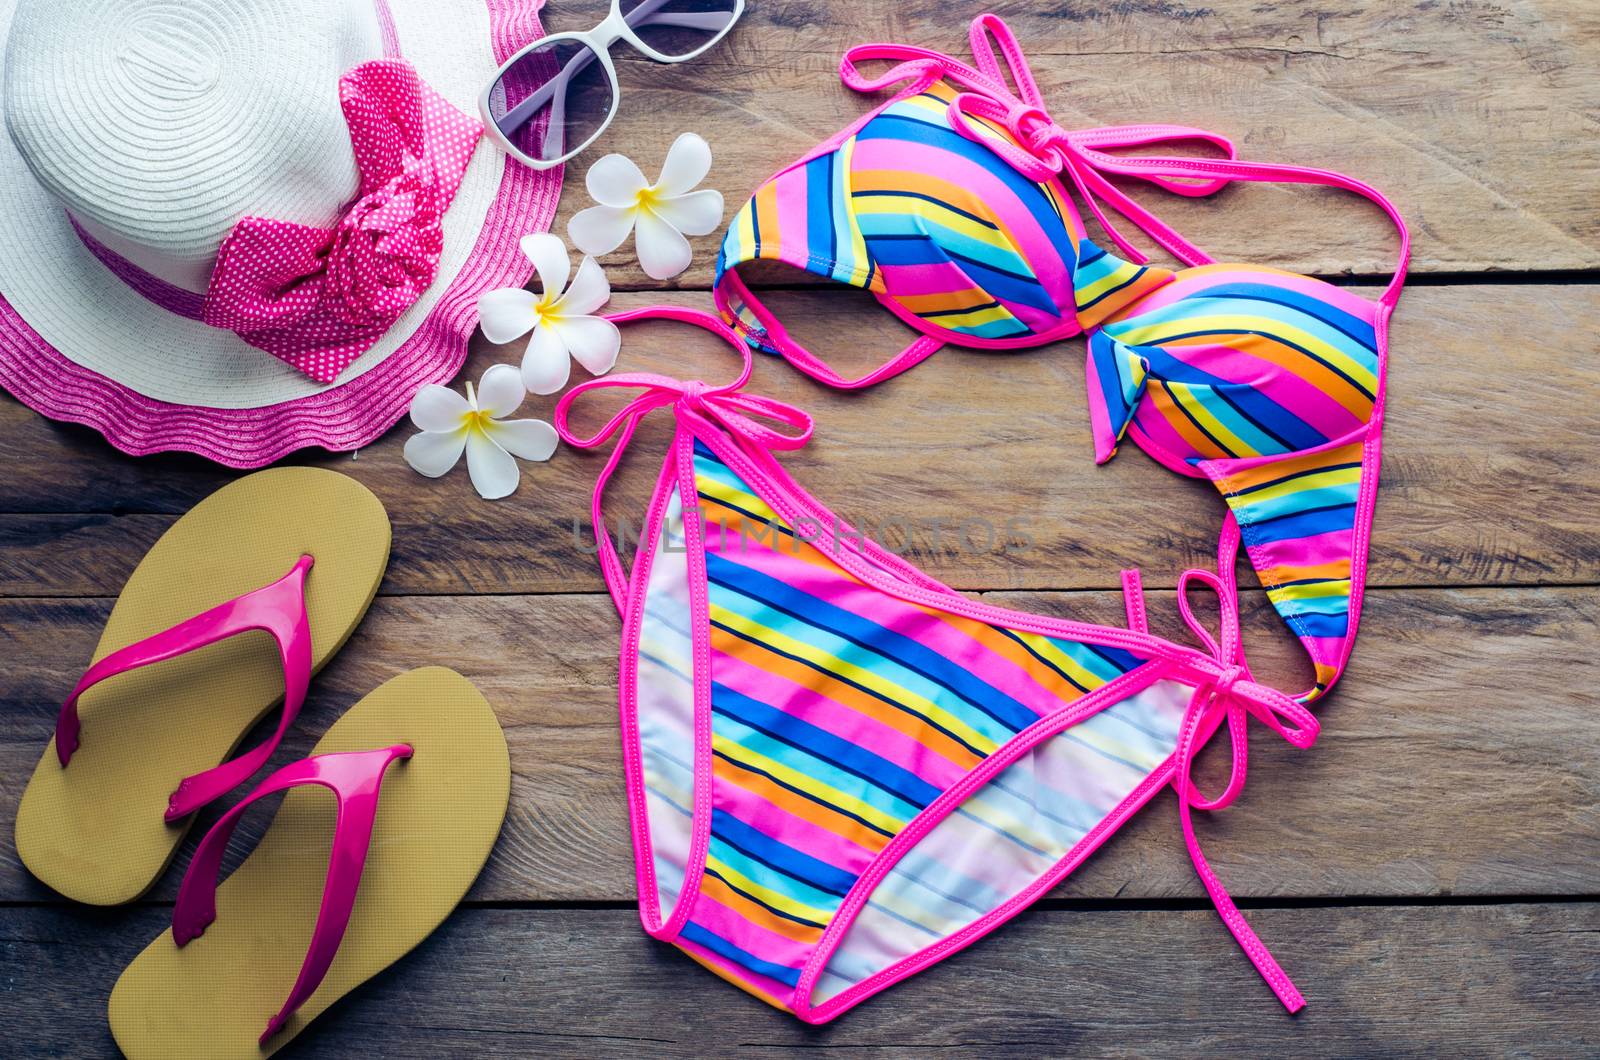 Beauty colorful bikini and accessories on wooden floor